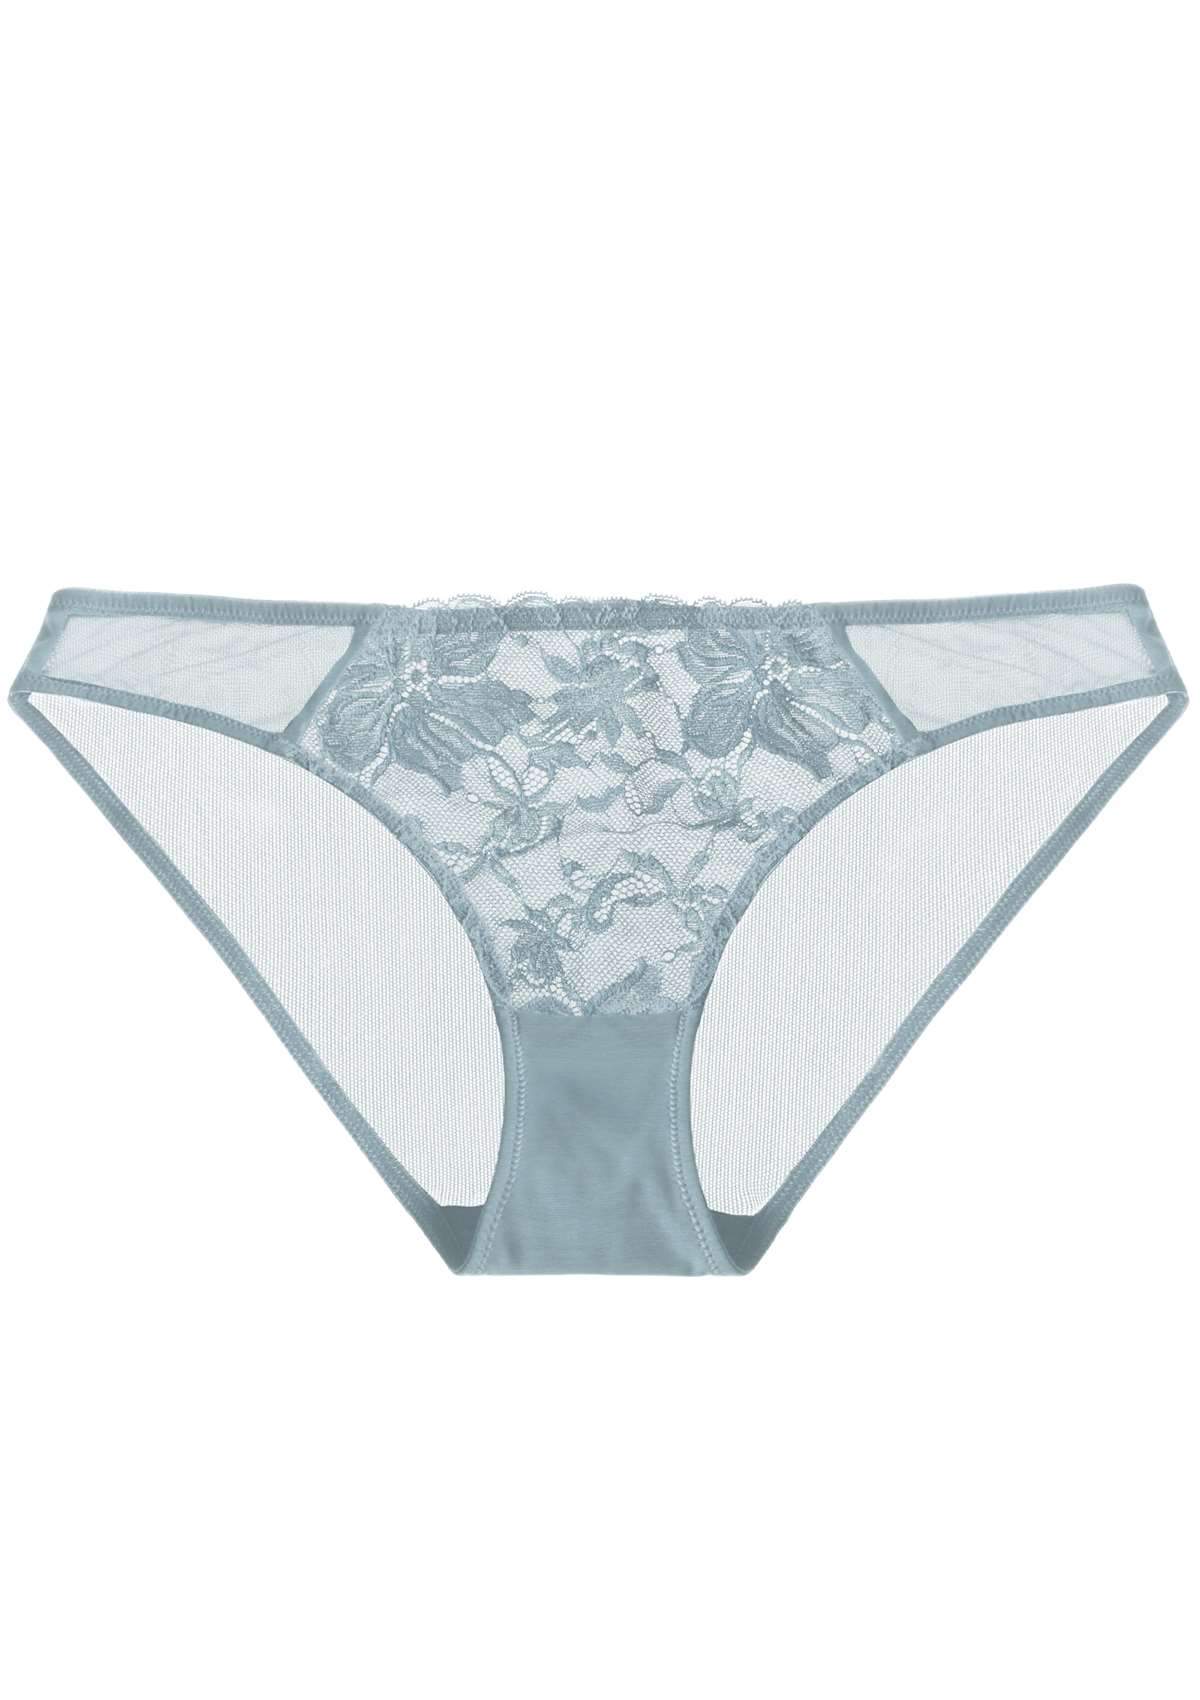 HSIA Pretty In Petals Mid-Rise Floral Lacy Mesh Lightweight Underwear  - XXL / Pewter Blue